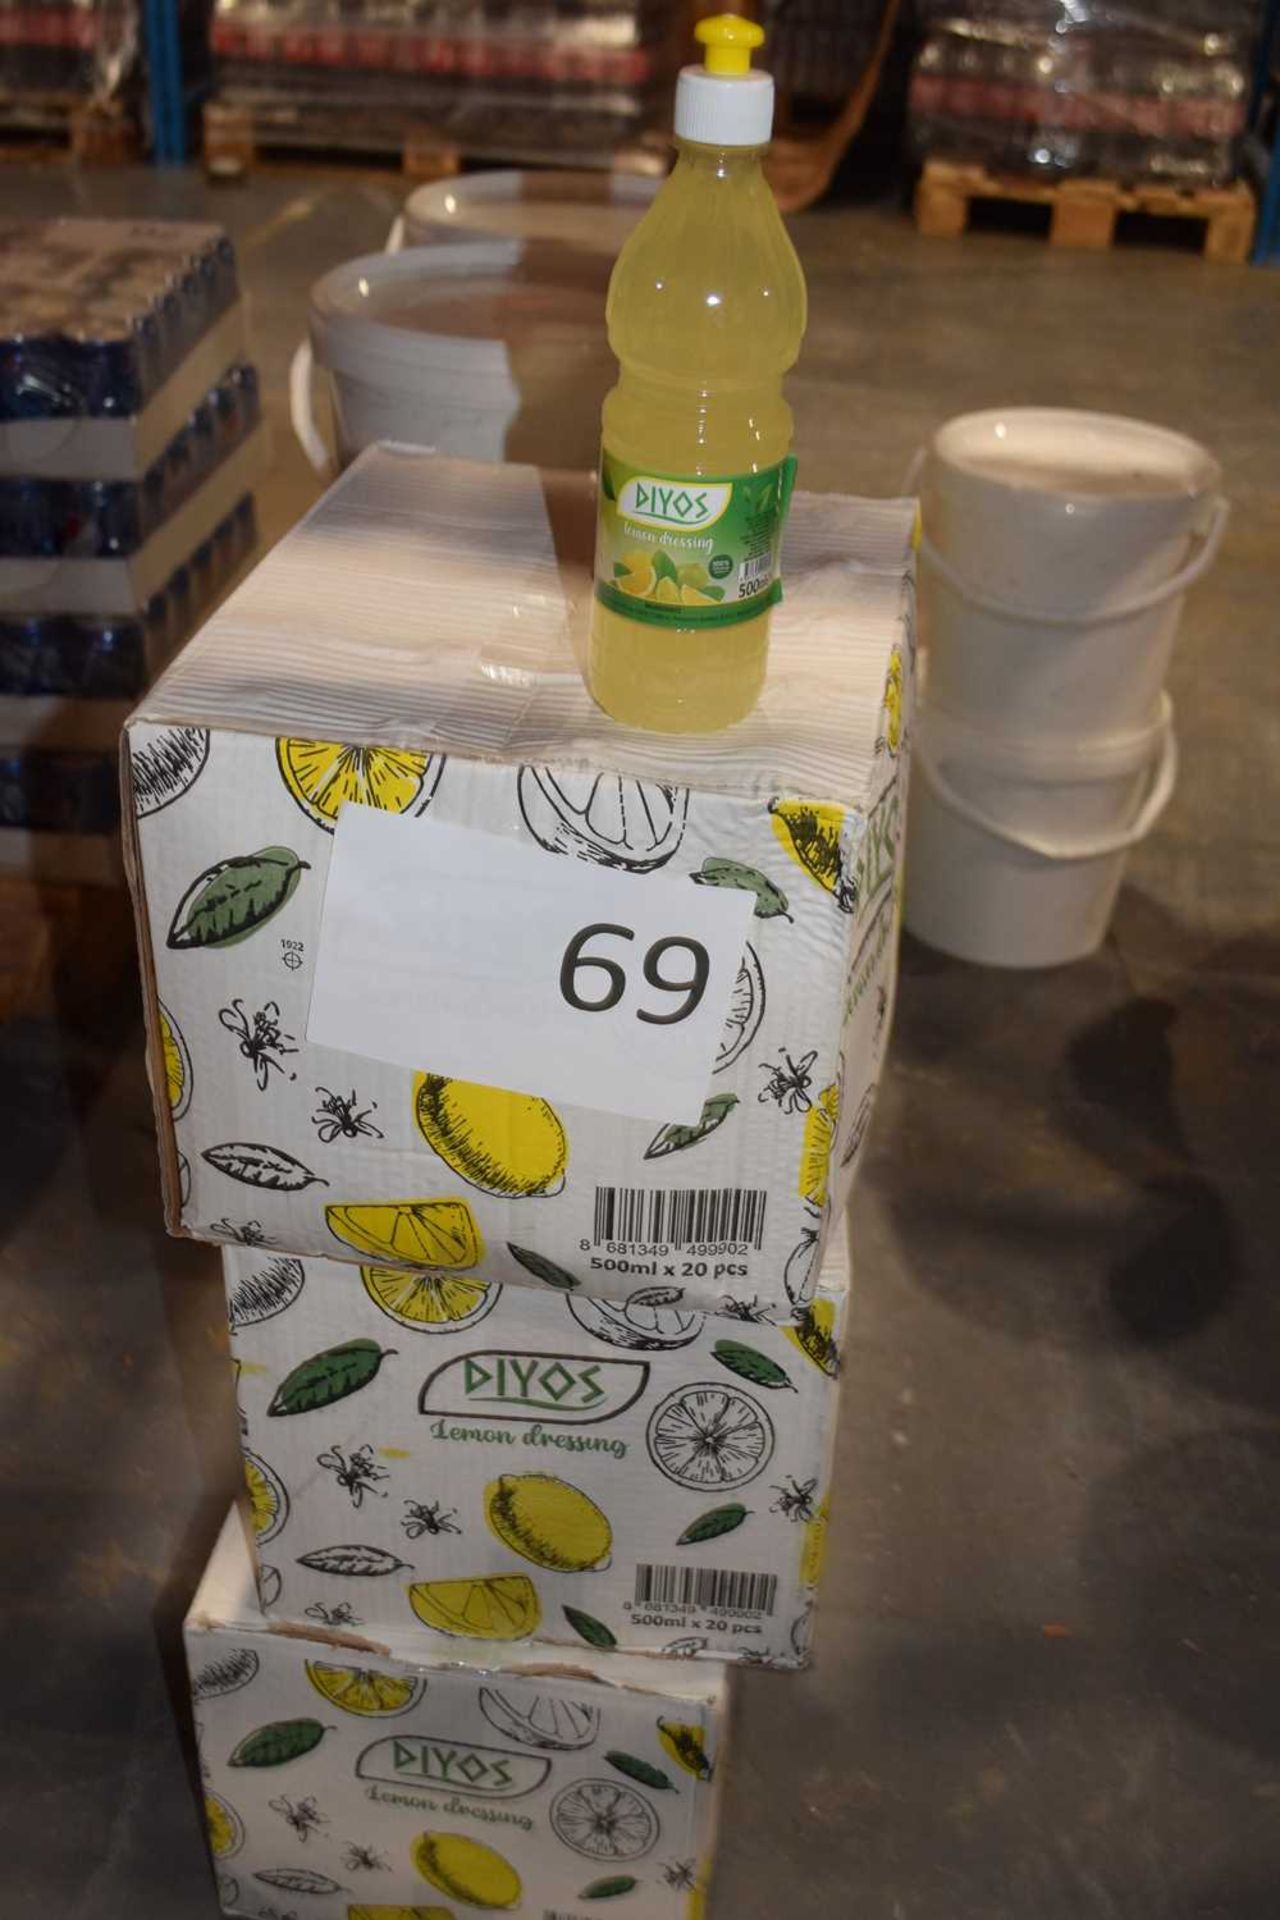 Three boxes of Diyos Lemon Dressing, each box containing 20 pieces of 500ml bottles